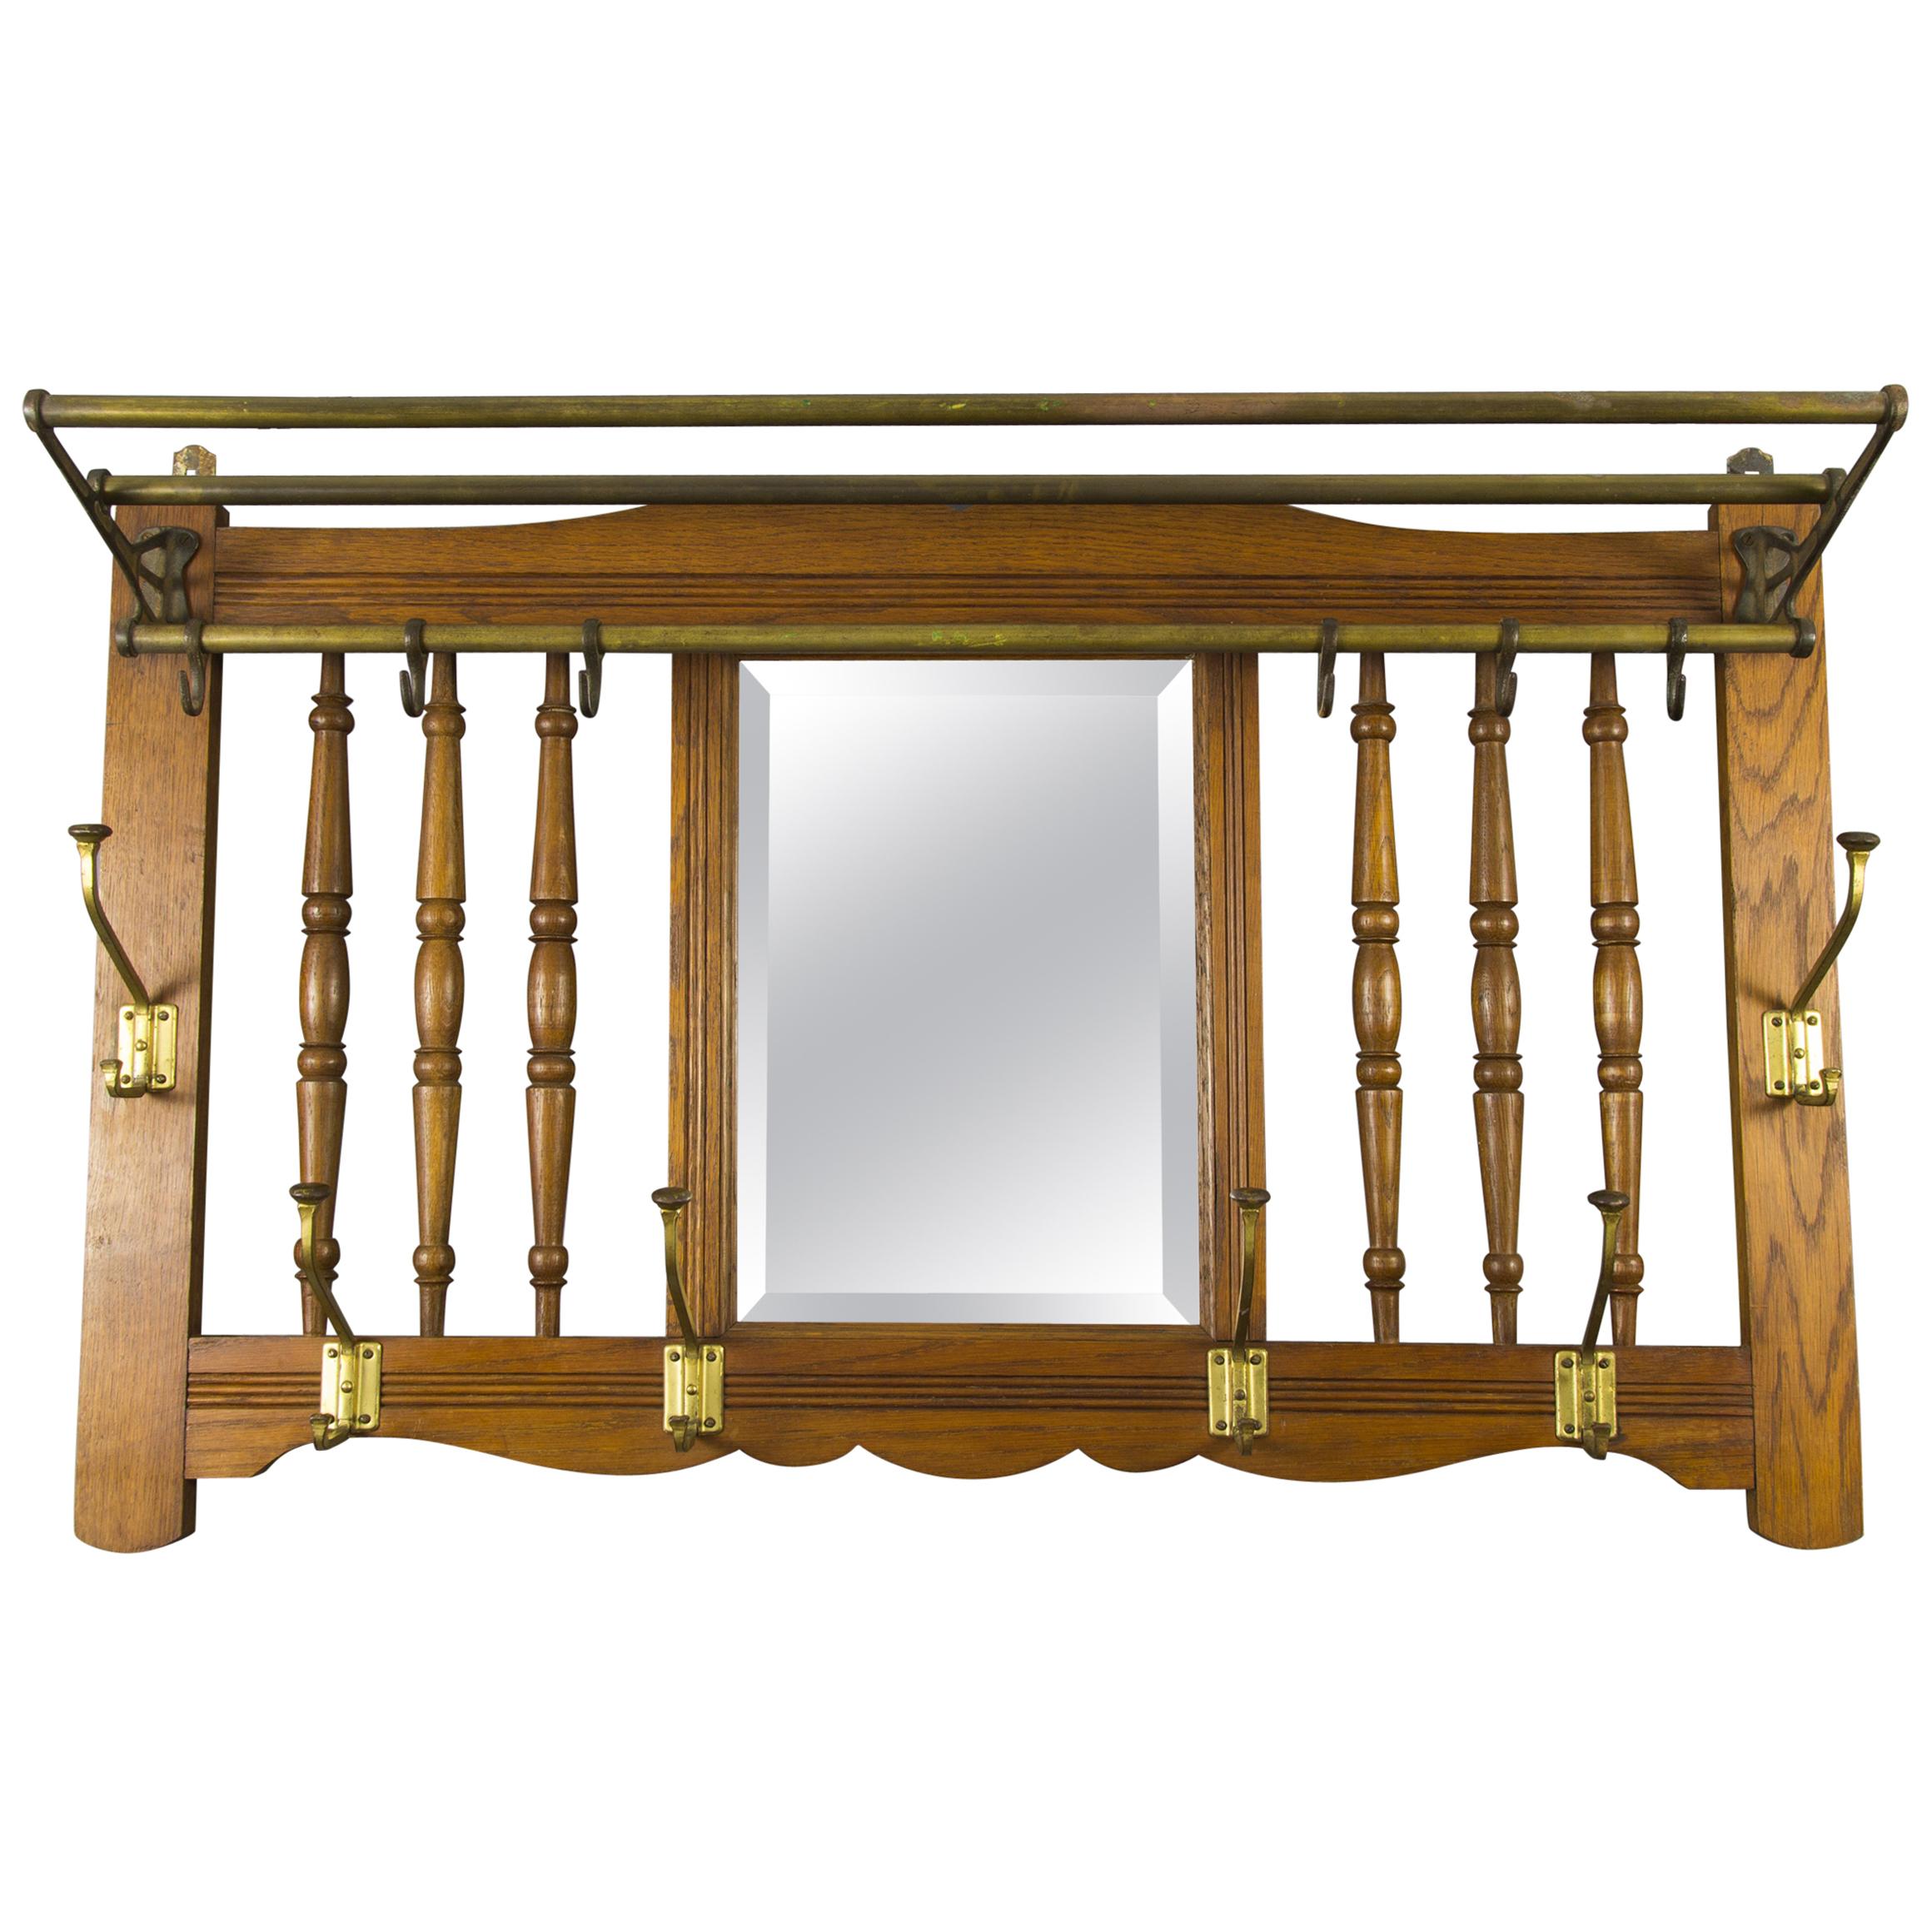 Art Nouveau French Oak and Brass Coat and Hat Wall Rack with Beveled Mirror